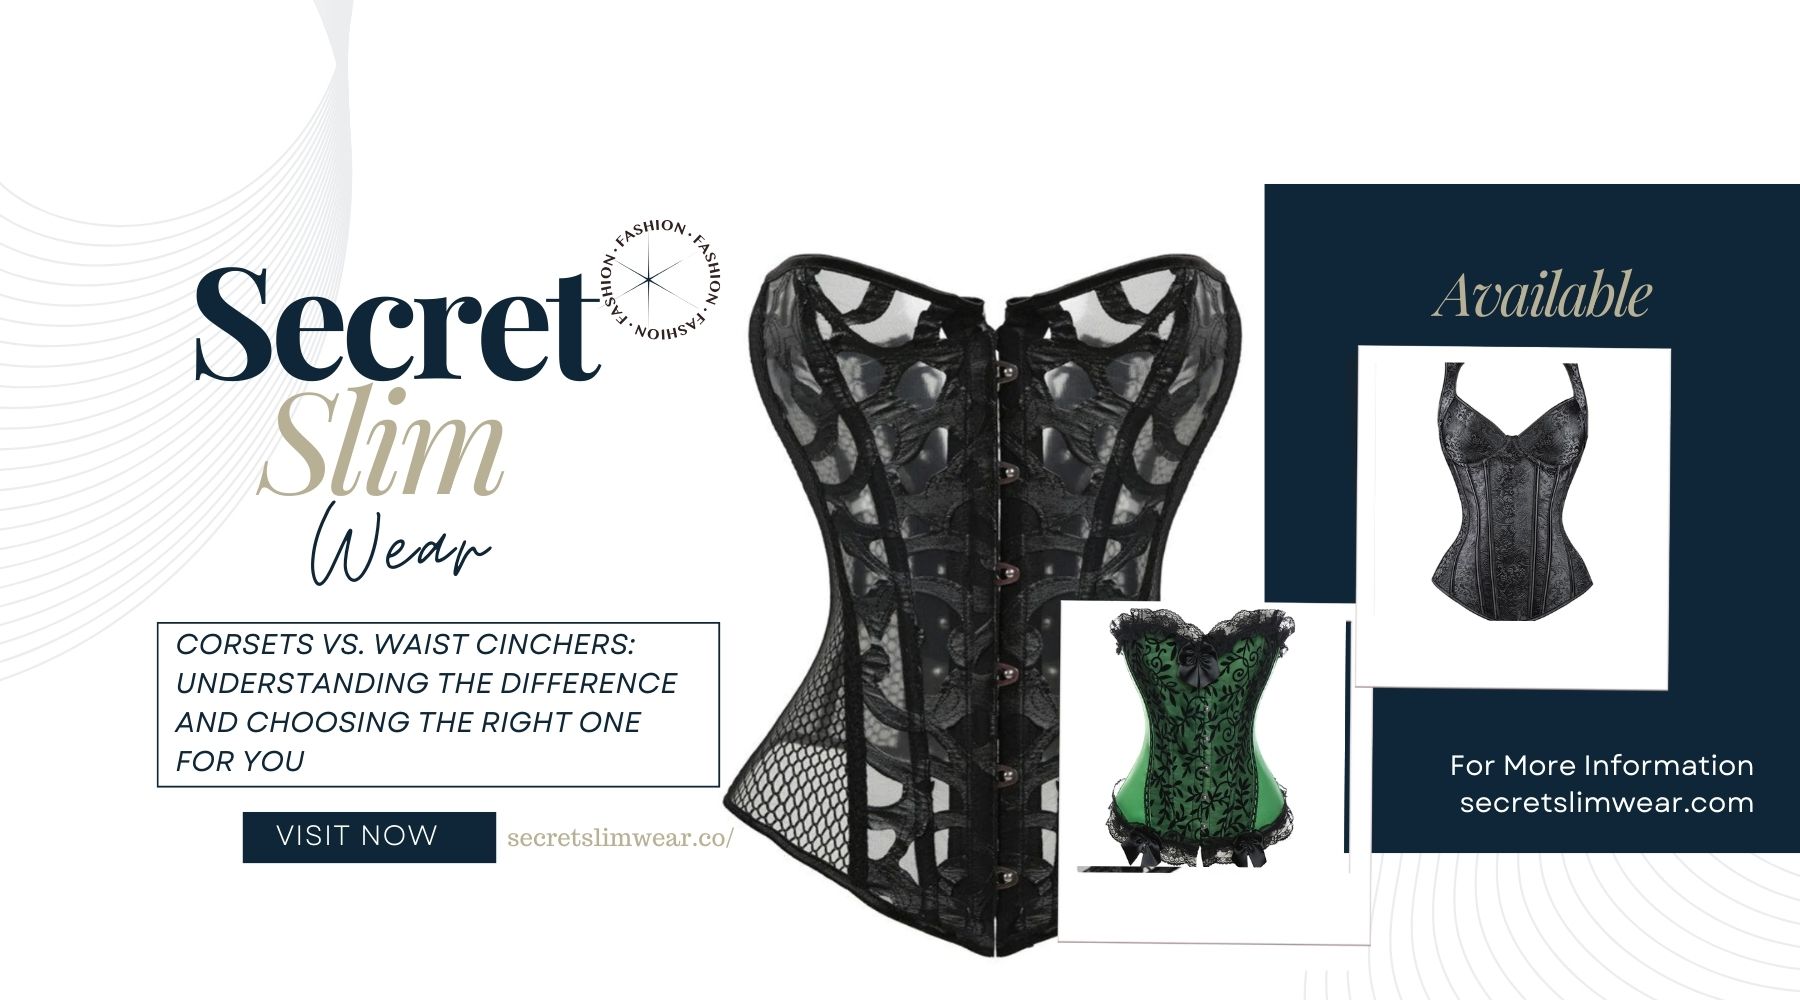 Corsets VS. Waist Cinchers: Understanding The Difference And Choosing the Right One For You